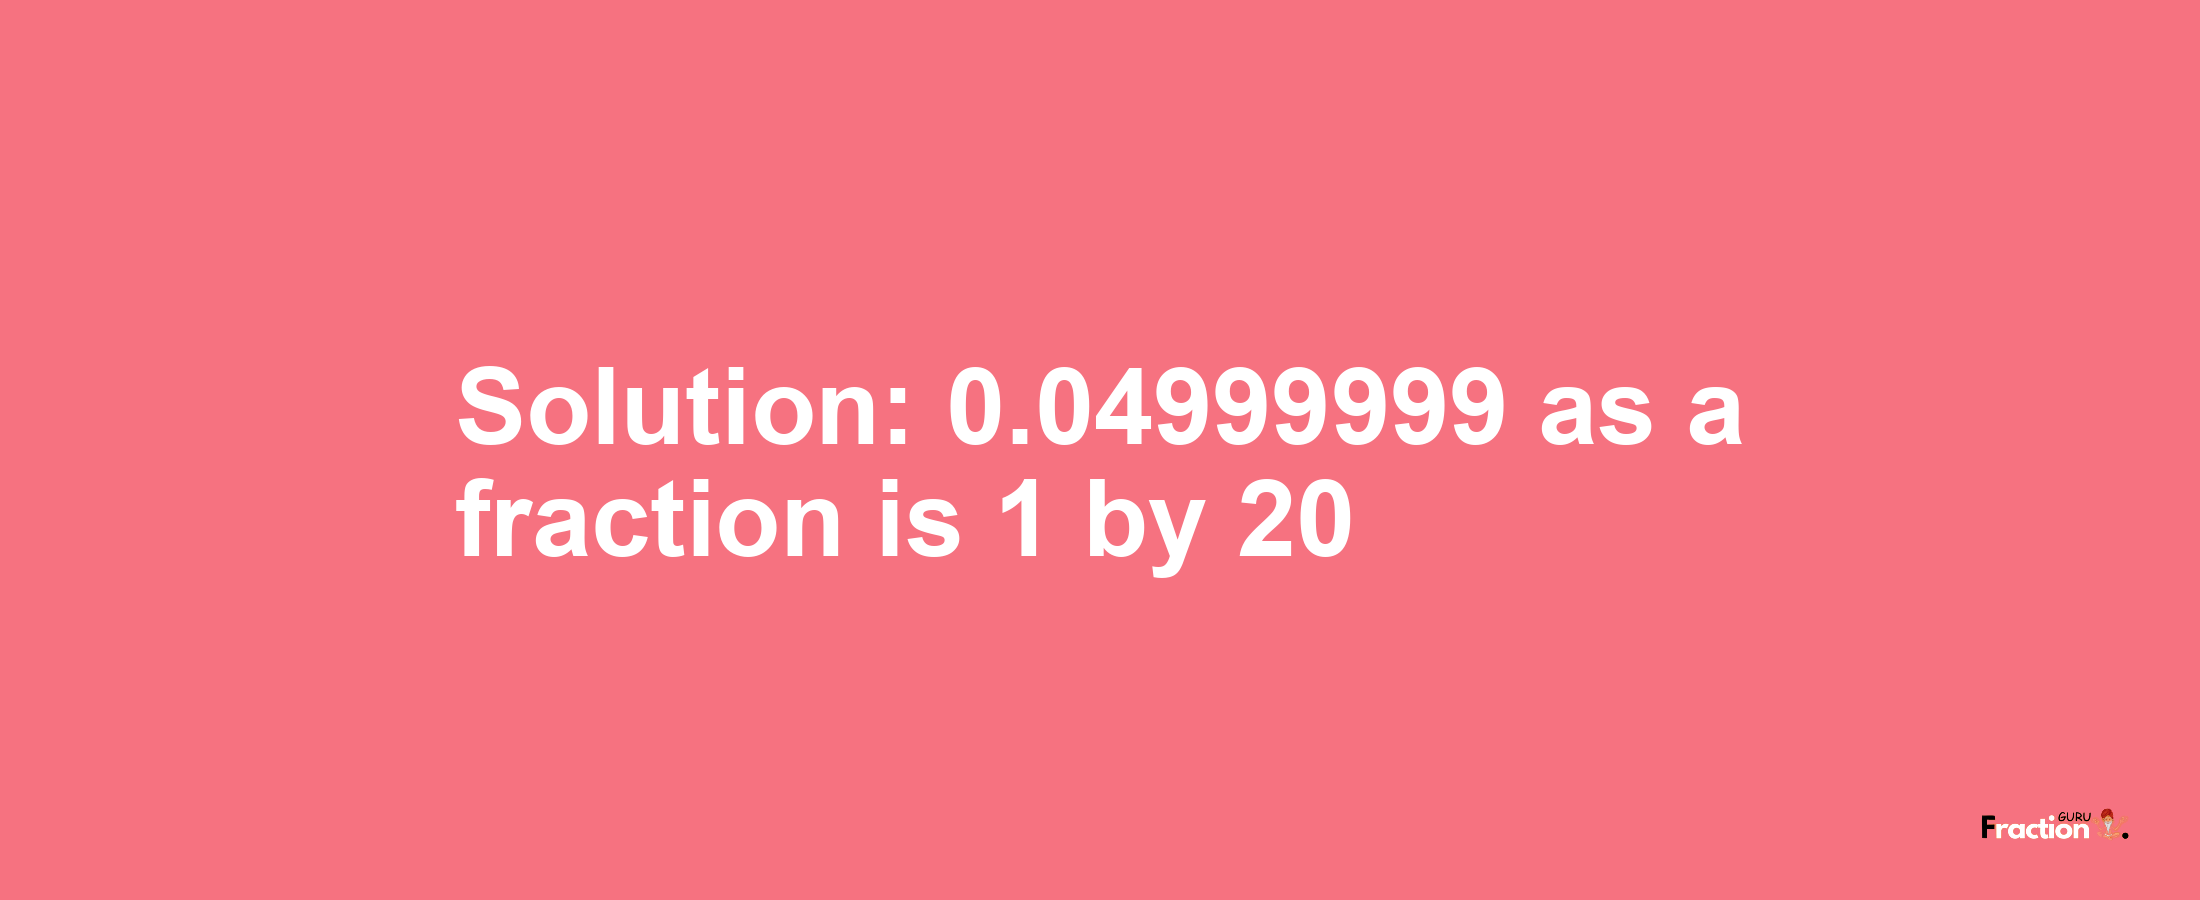 Solution:0.04999999 as a fraction is 1/20